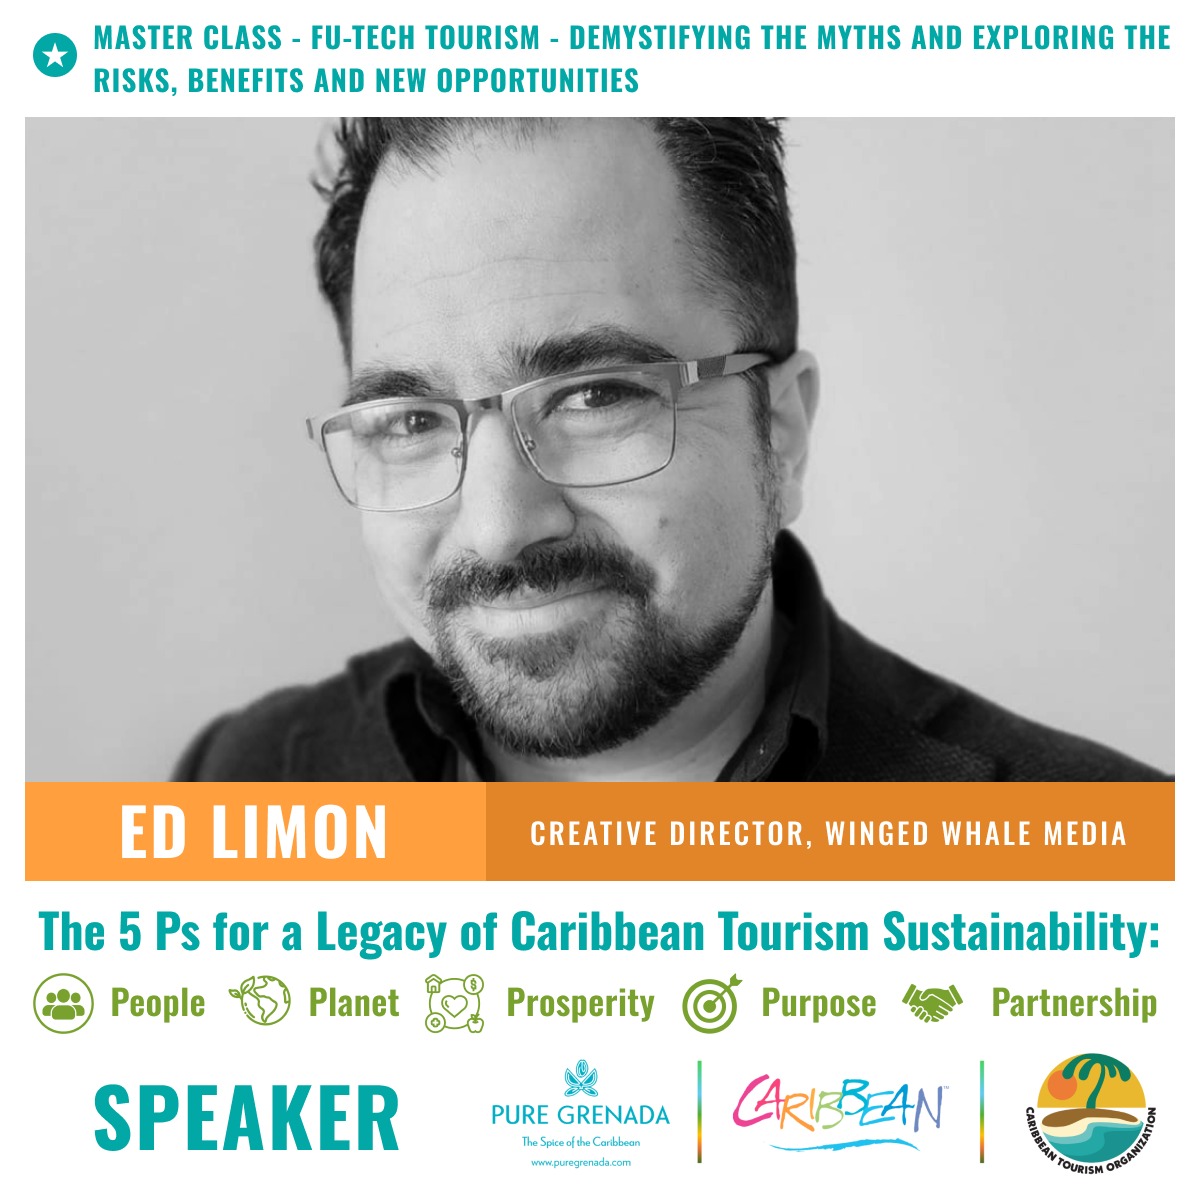 Ed Limon, the co-founder and producer of the pioneering studio Winged Whale Media, will take part in an enlightening “Fu-Tech Tourism” master class at our annual Caribbean Sustainable Tourism Conference on Tuesday, April 23 in Grenada. caribbeanstc.com/session/master…